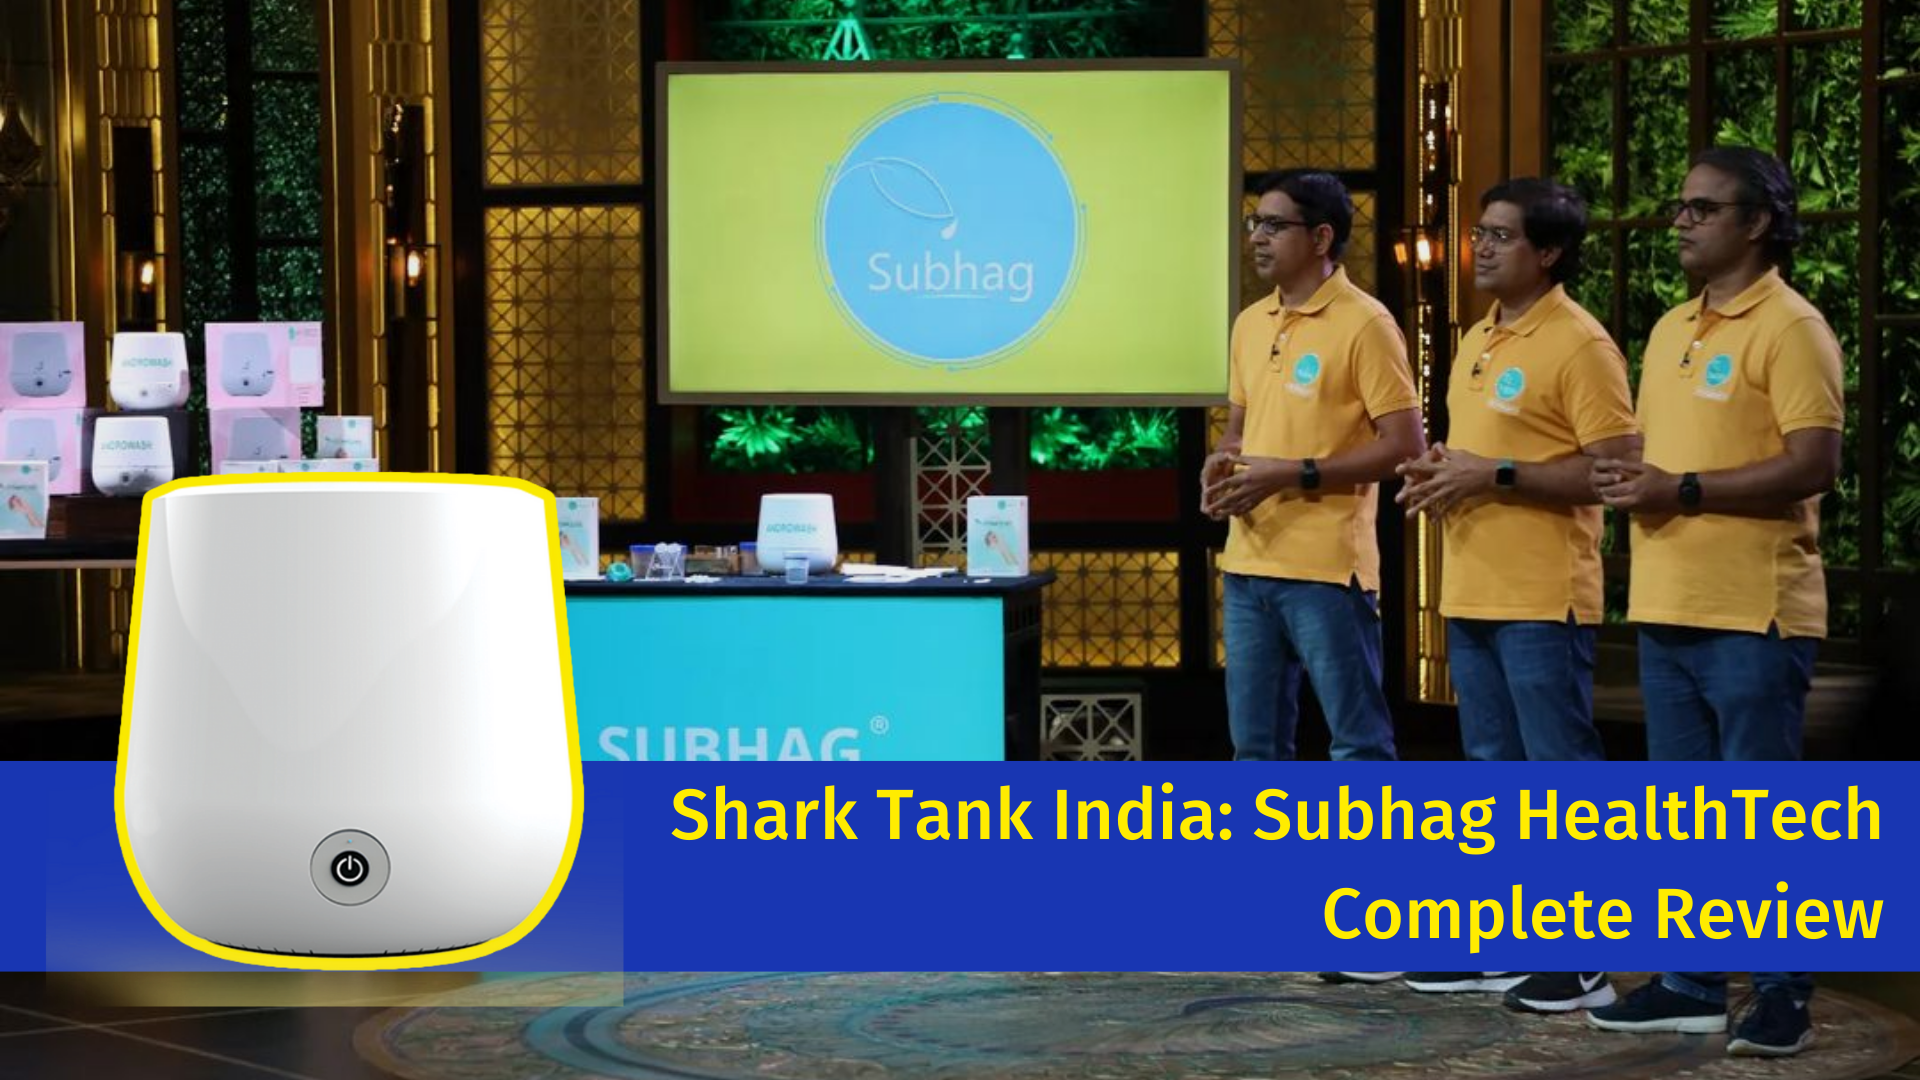 Shark Tank India: Subhag HealthTech Complete Review